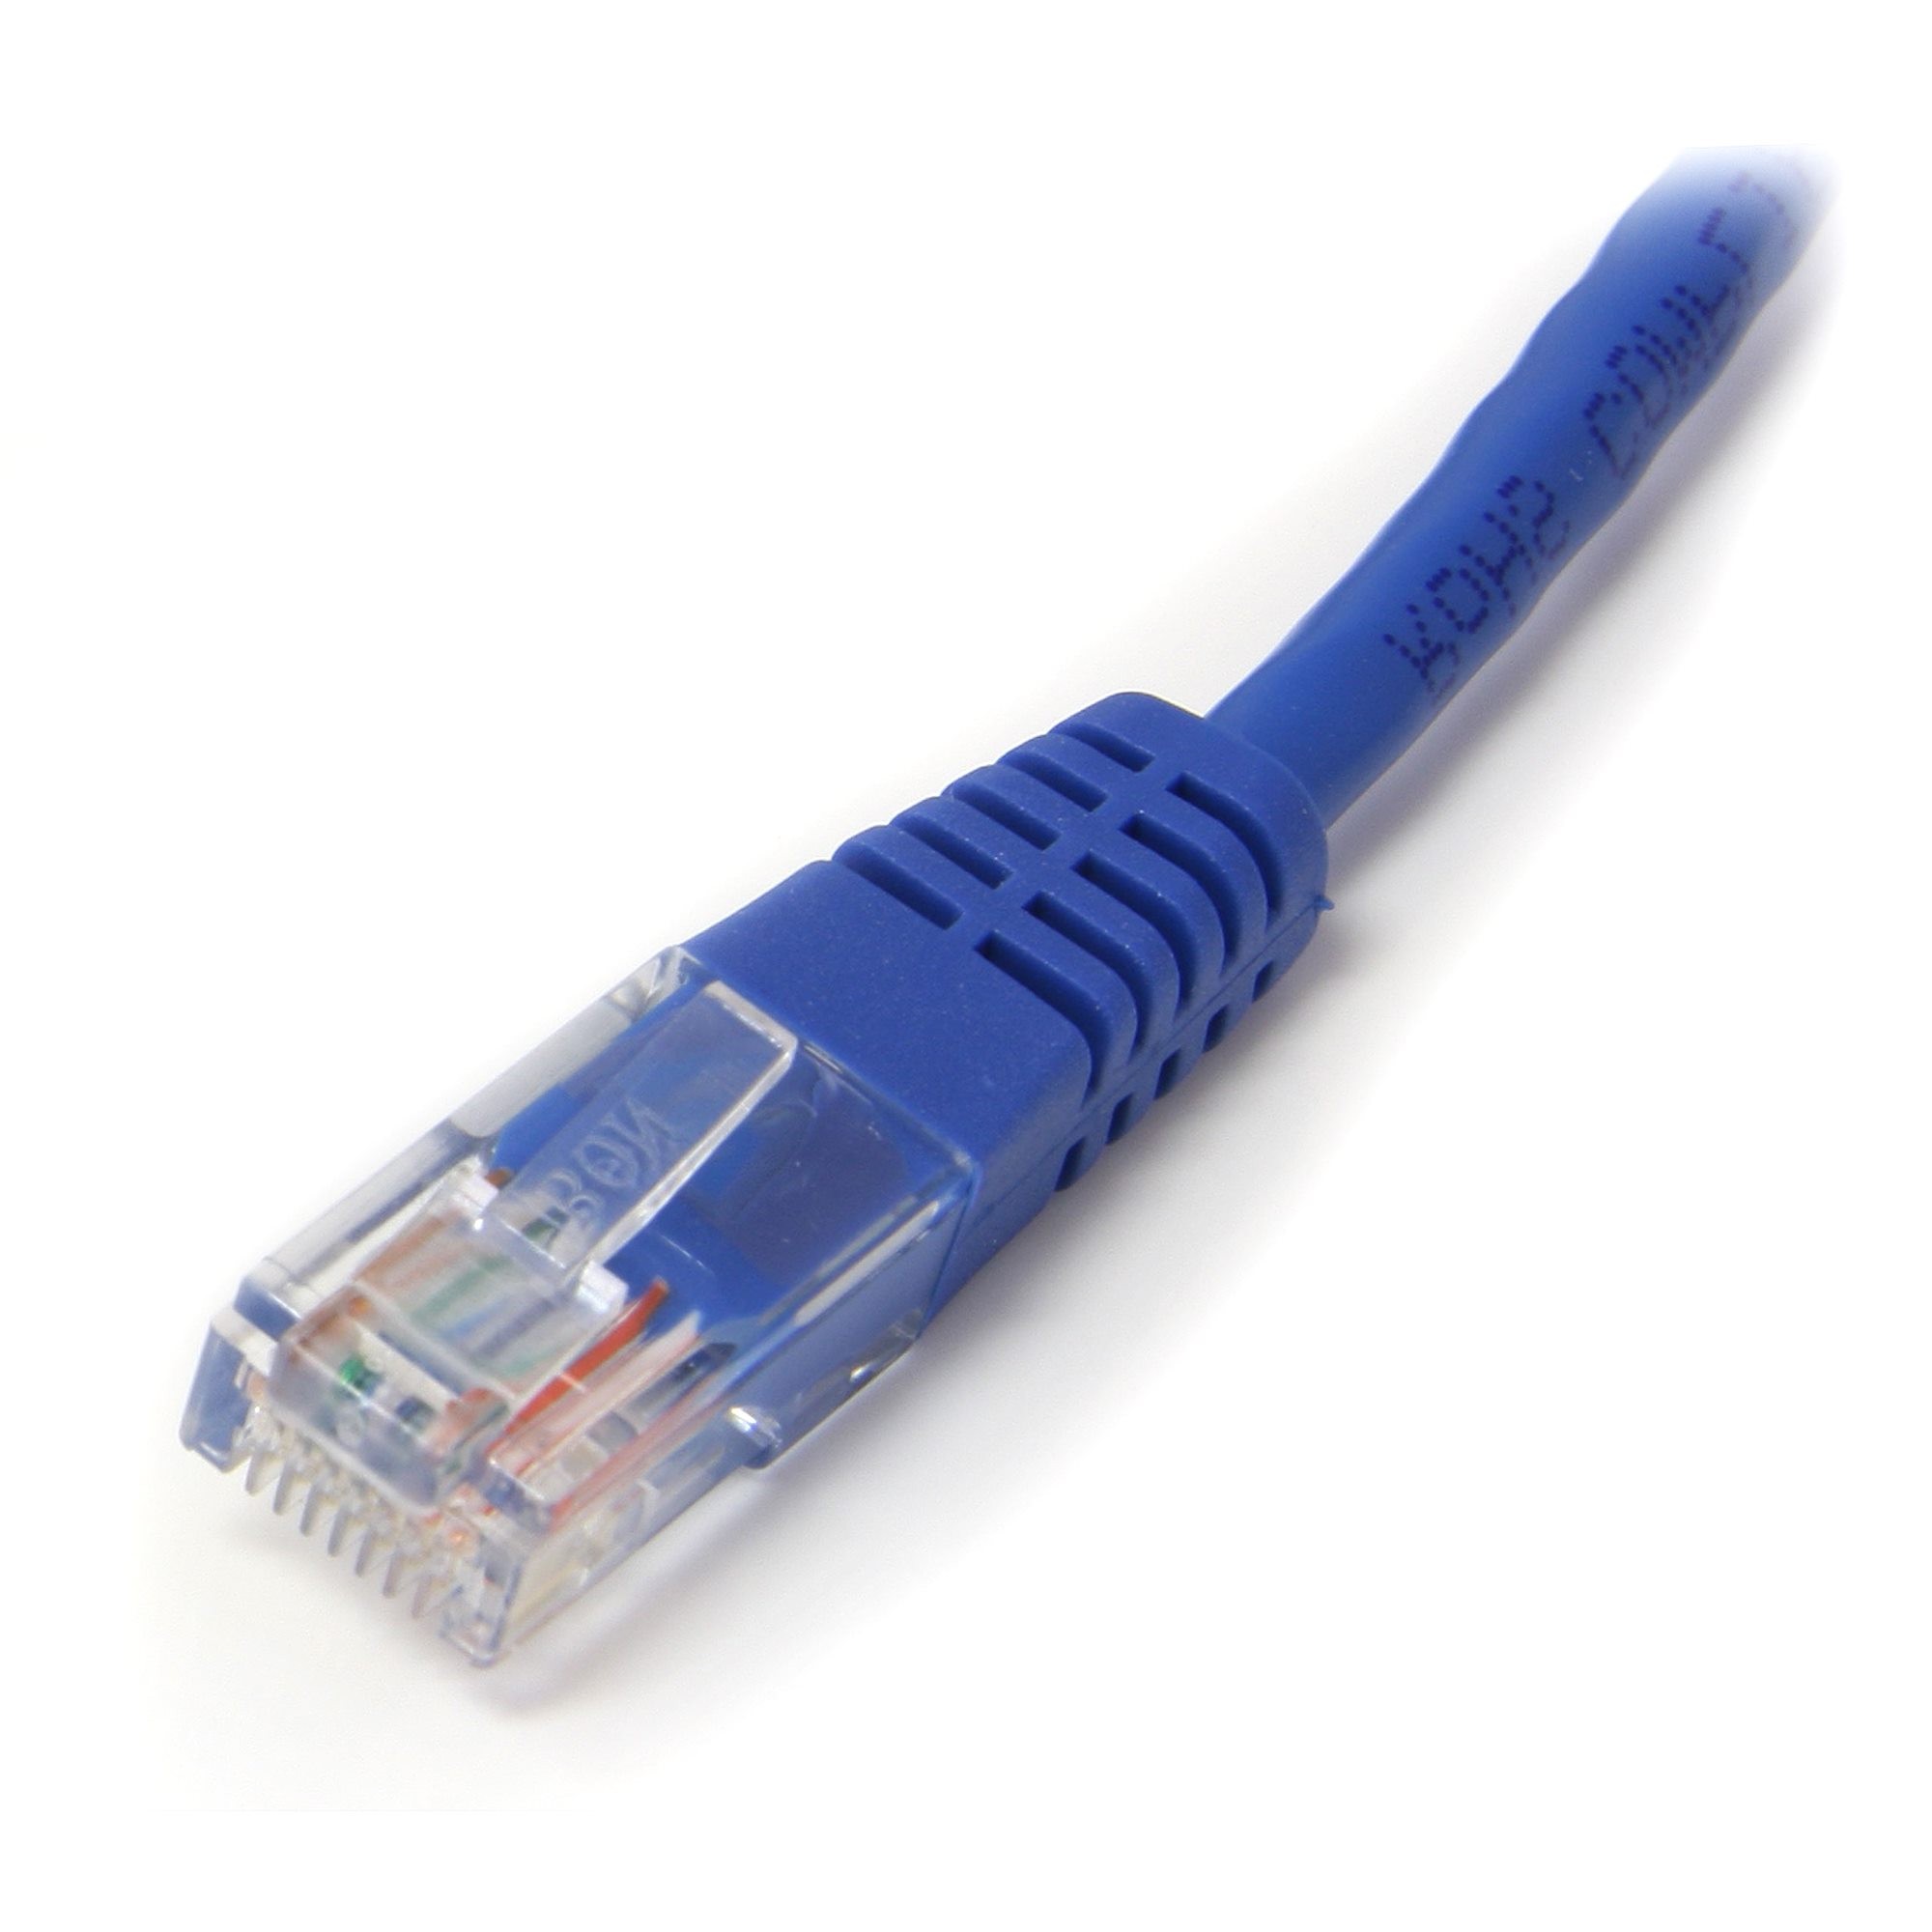 Middag eten toewijzen bedrijf STCM45PATCH6BL - StarTech.com 6 ft Blue Molded Cat5e UTP Patch Cable - Make  Fast Ethernet network connections using this high quality Cat5e Cable, with  Power-over-Ethernet capability - 6ft Cat5e Patch Cable -